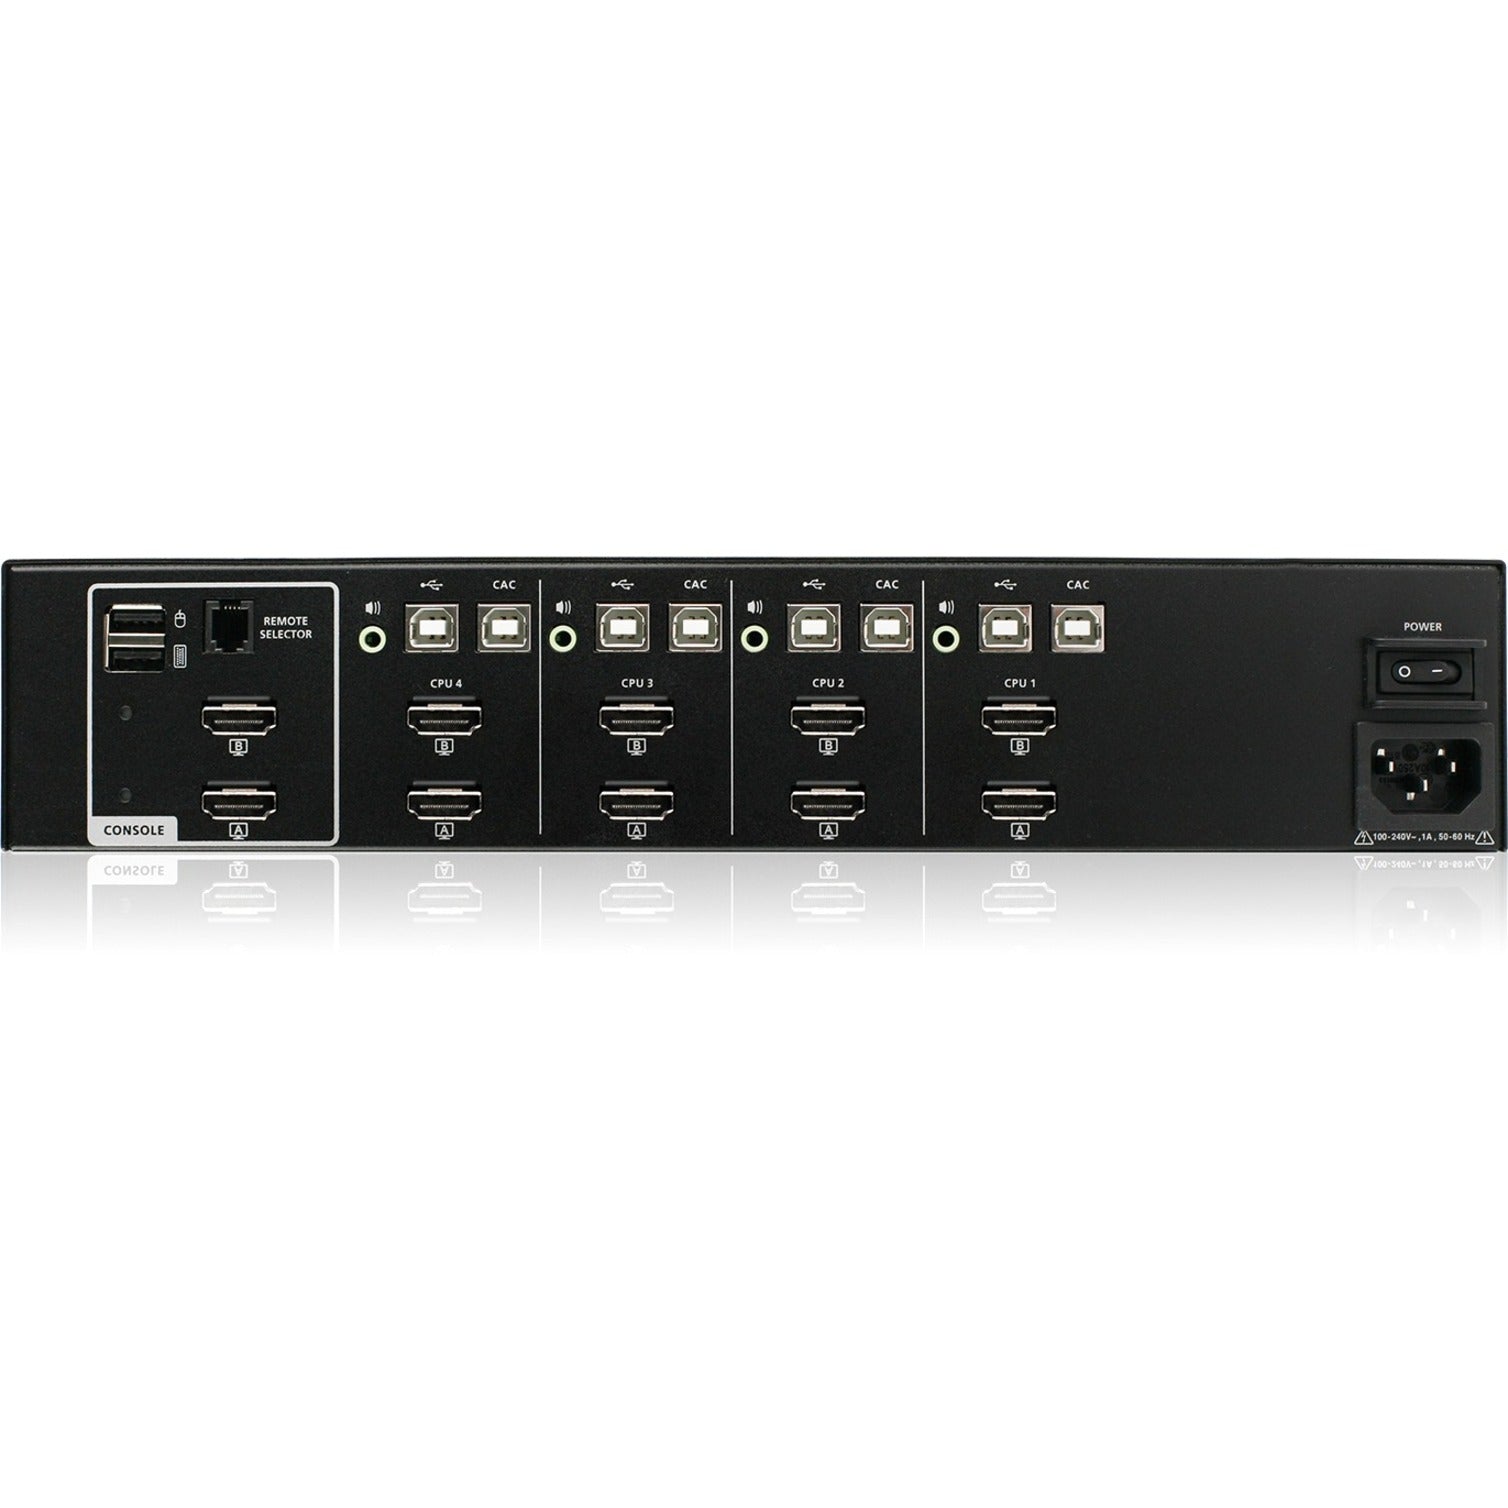 IOGEAR GCS1324TAA4C 4-Port Dual View HDMI Secure KVM with Audio and CAC Protection Profile v4.0, 3840 x 2160 Resolution, 3 Year Warranty